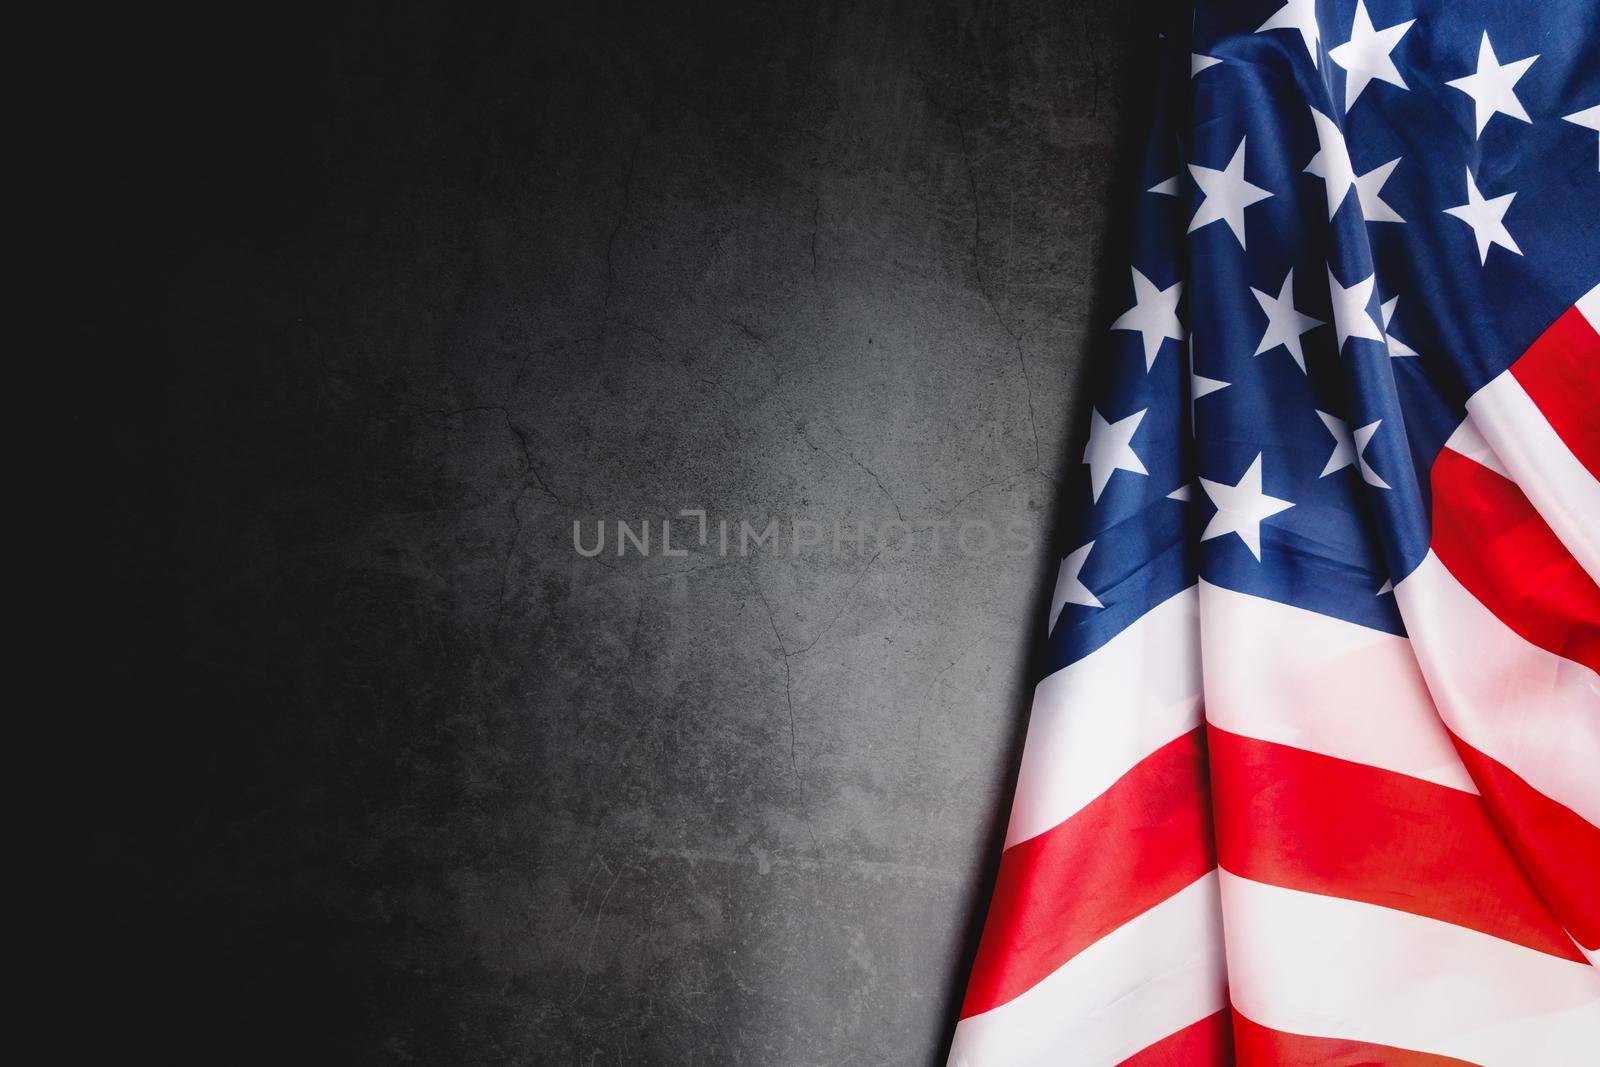 Veterans day. Honoring all who served. American flag on gray background with copy space.